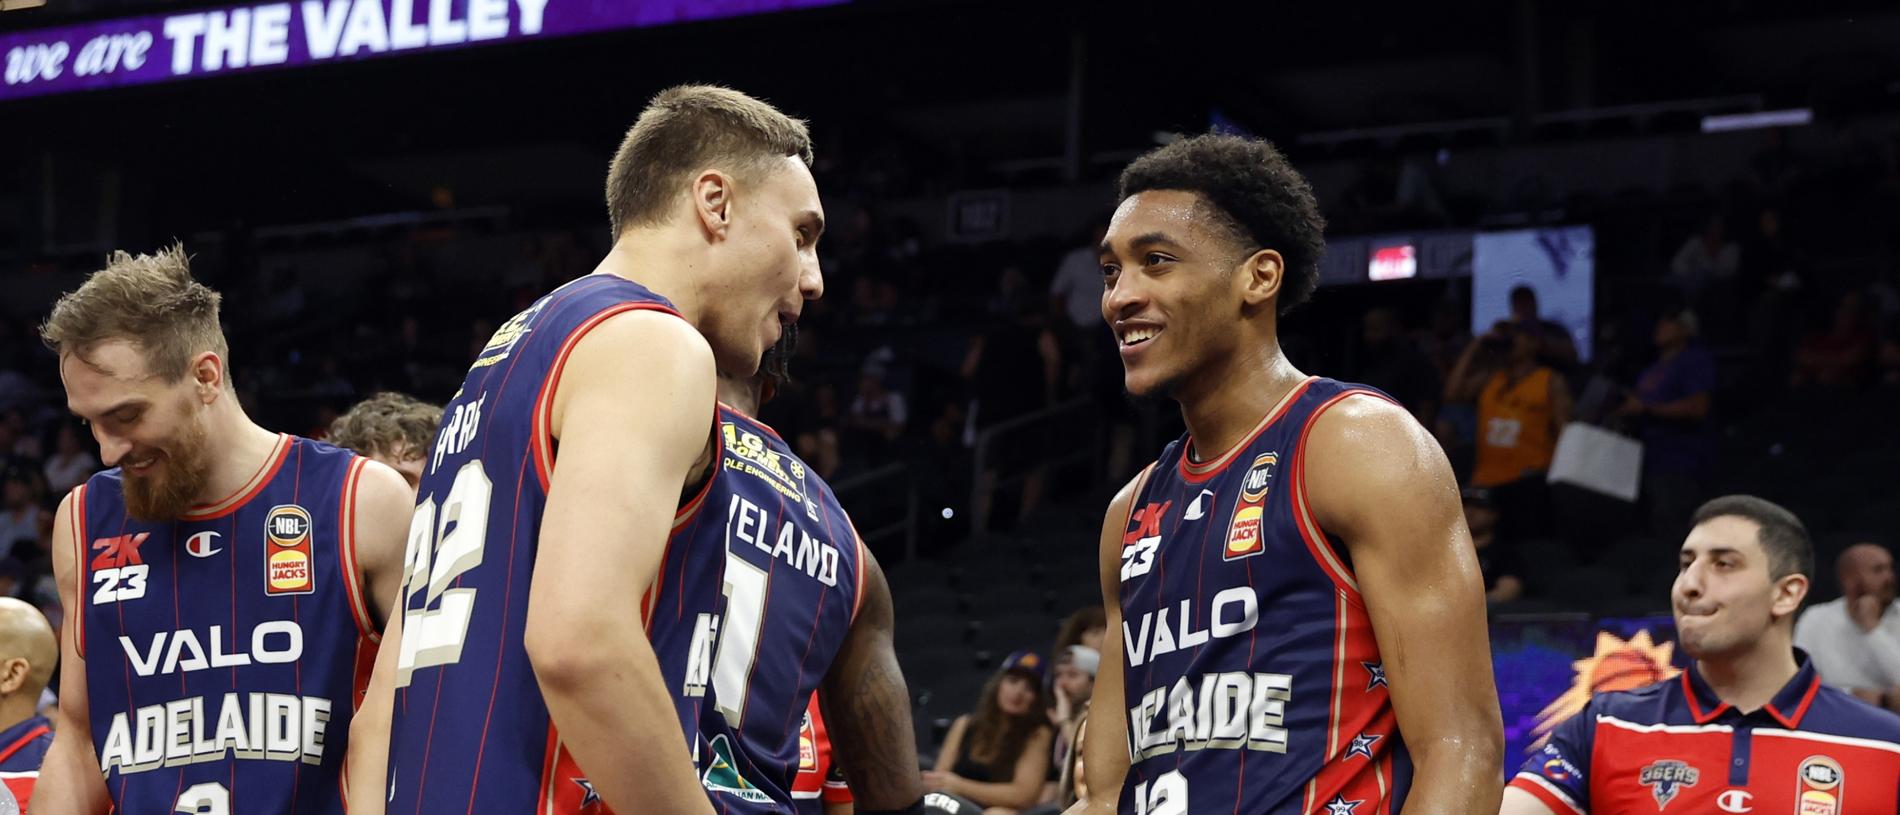 2022/23 NBL season preview - Adelaide 36ers - Basketball Rookie Me Central